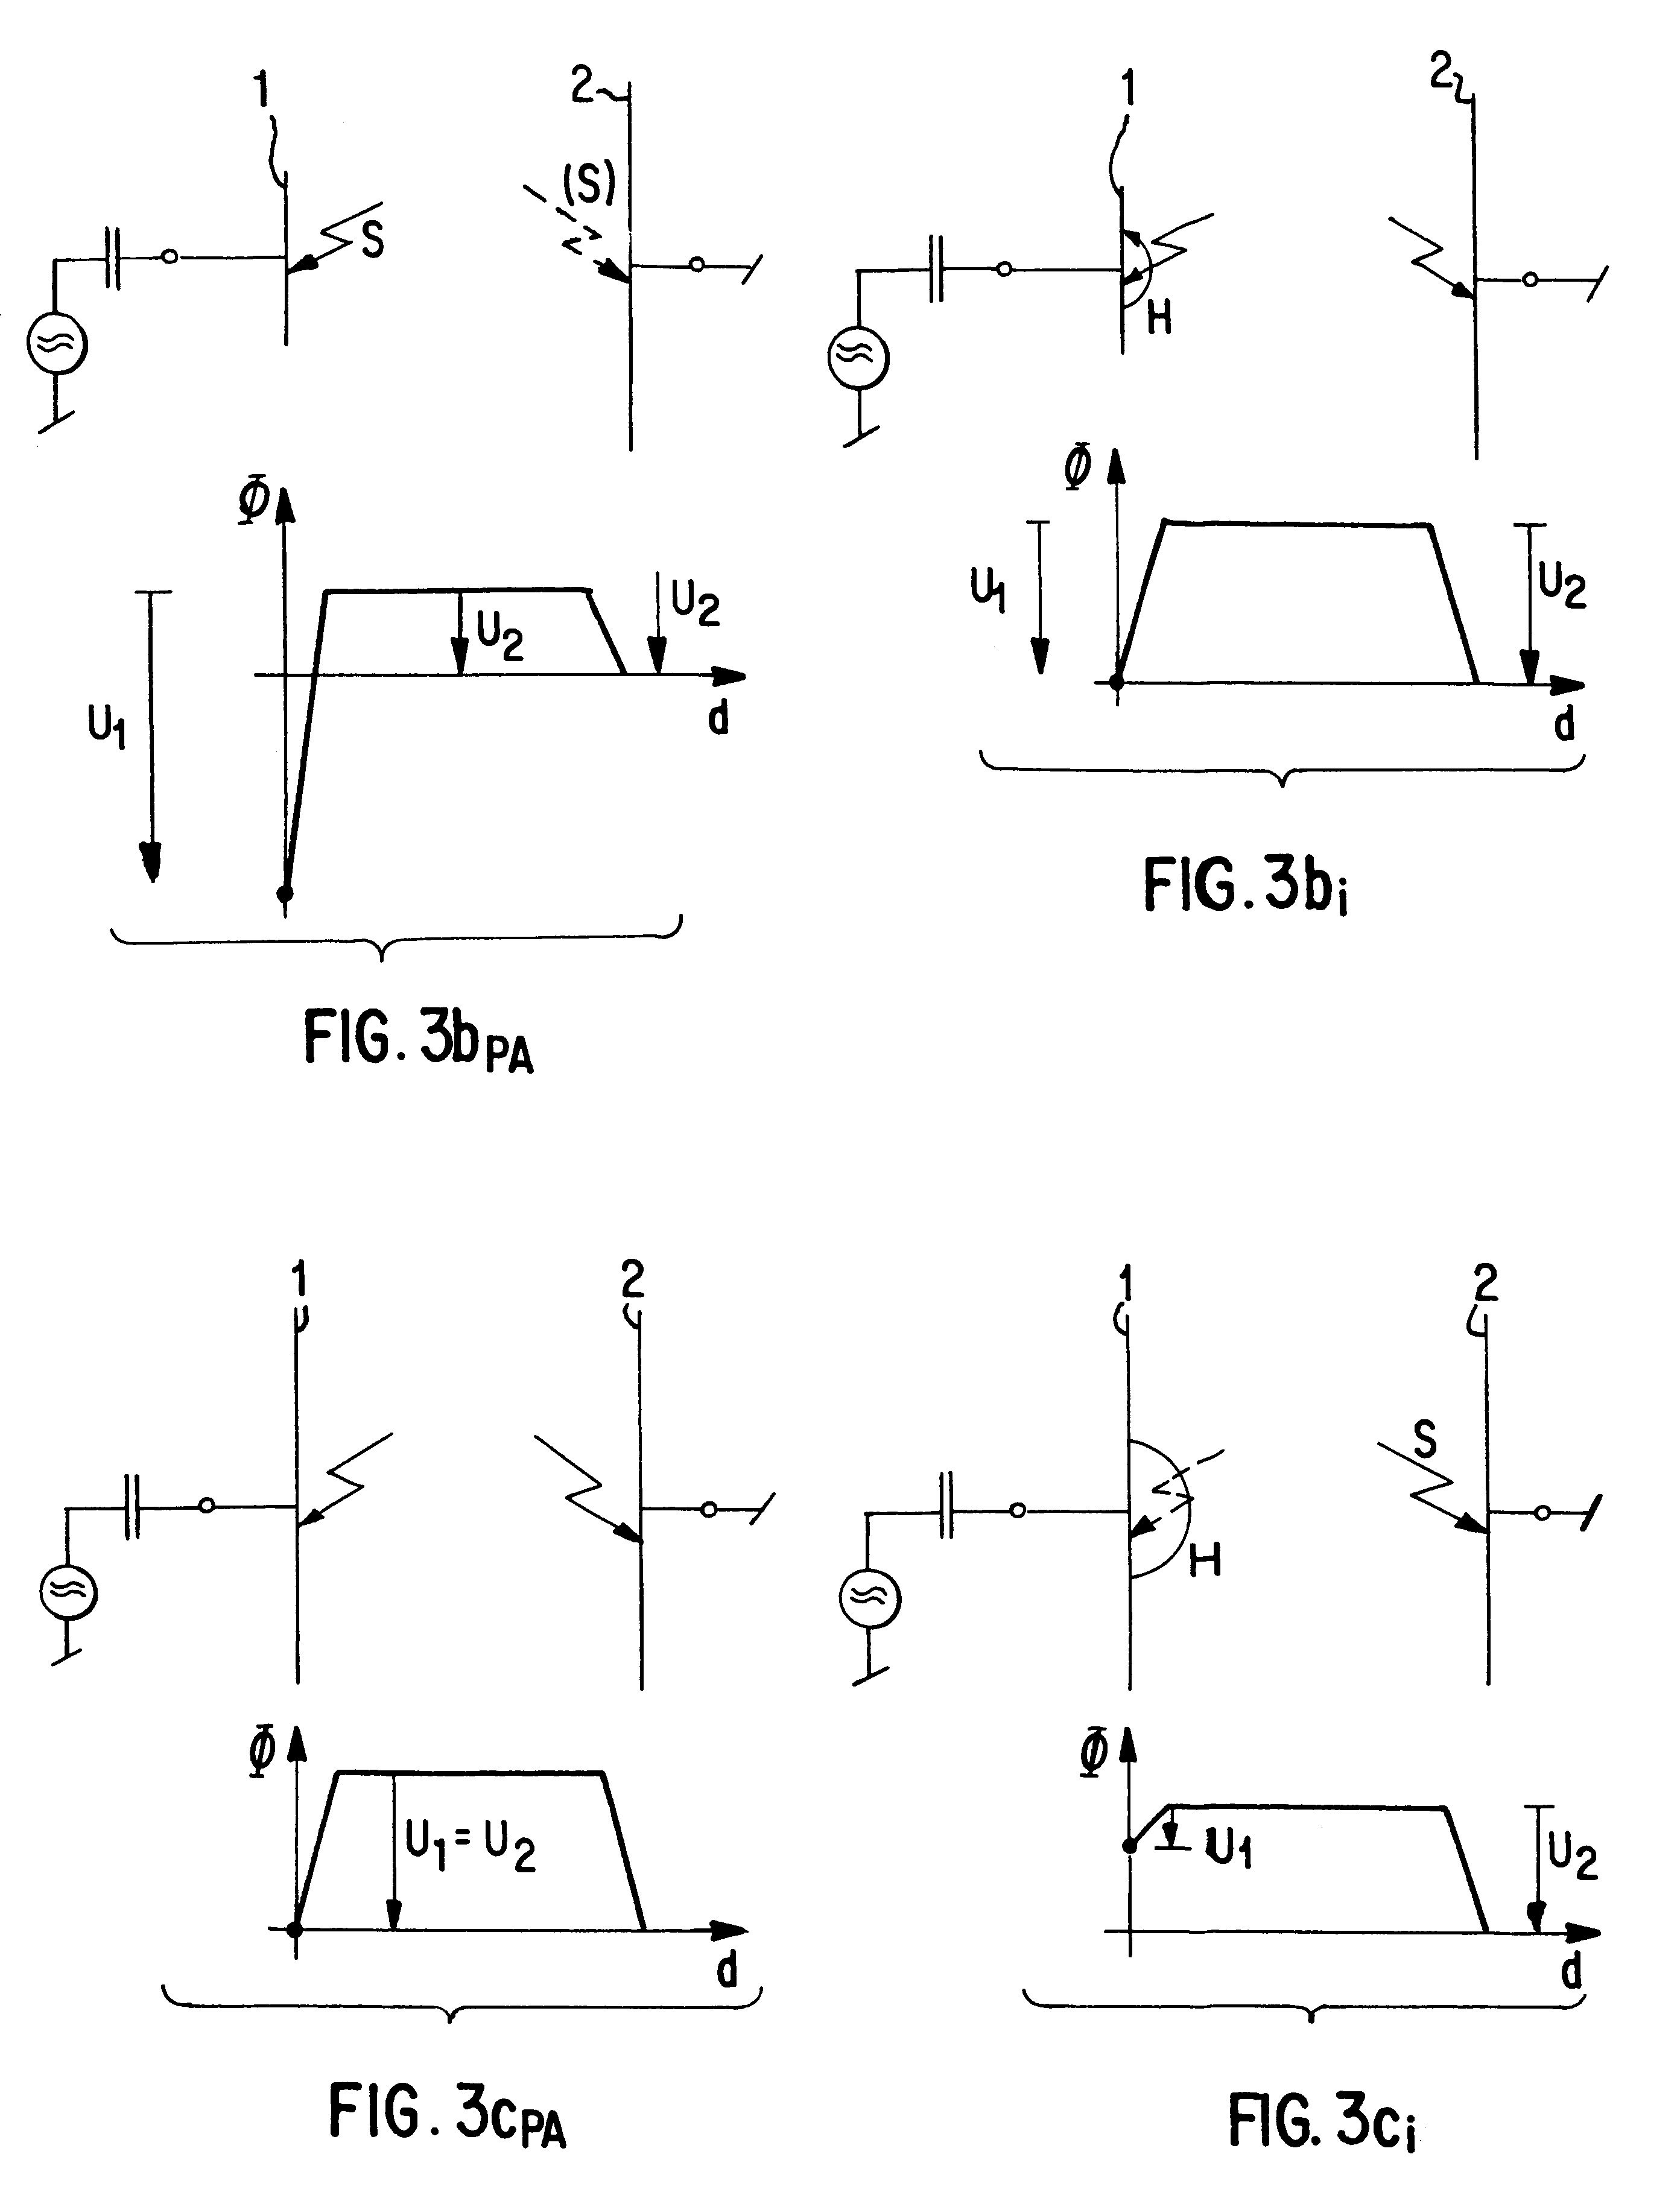 Process and apparatus for sputter etching or sputter coating